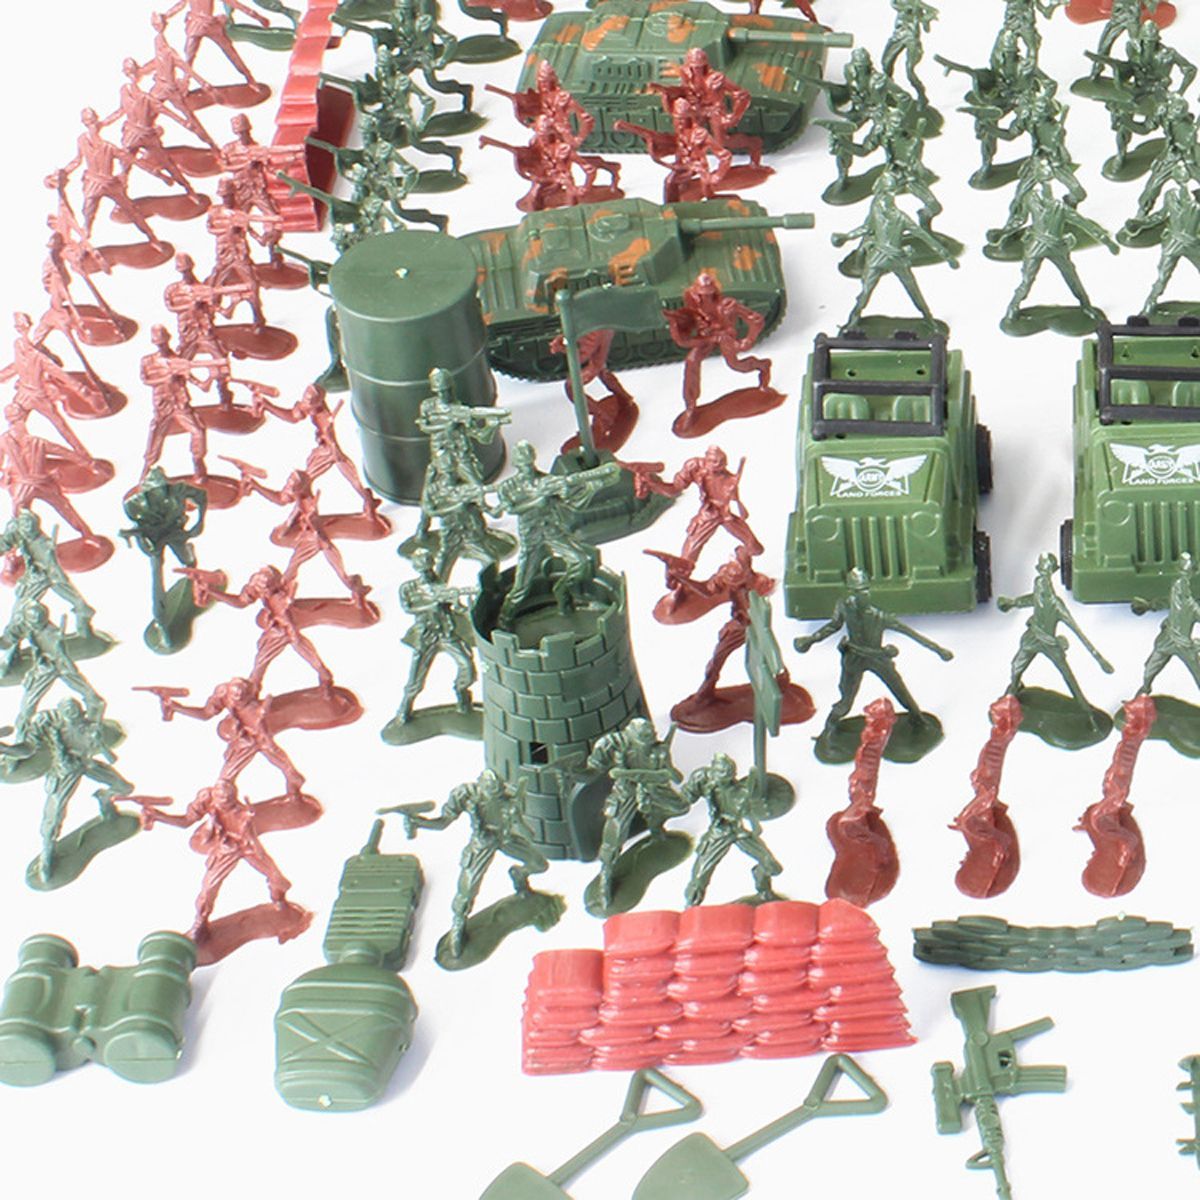 307pcs-Soldiers-Grenade-T-ank-Aircraft-Rocket-Army-Men-Sand-Scene-Model-Kids-Toys-1472906